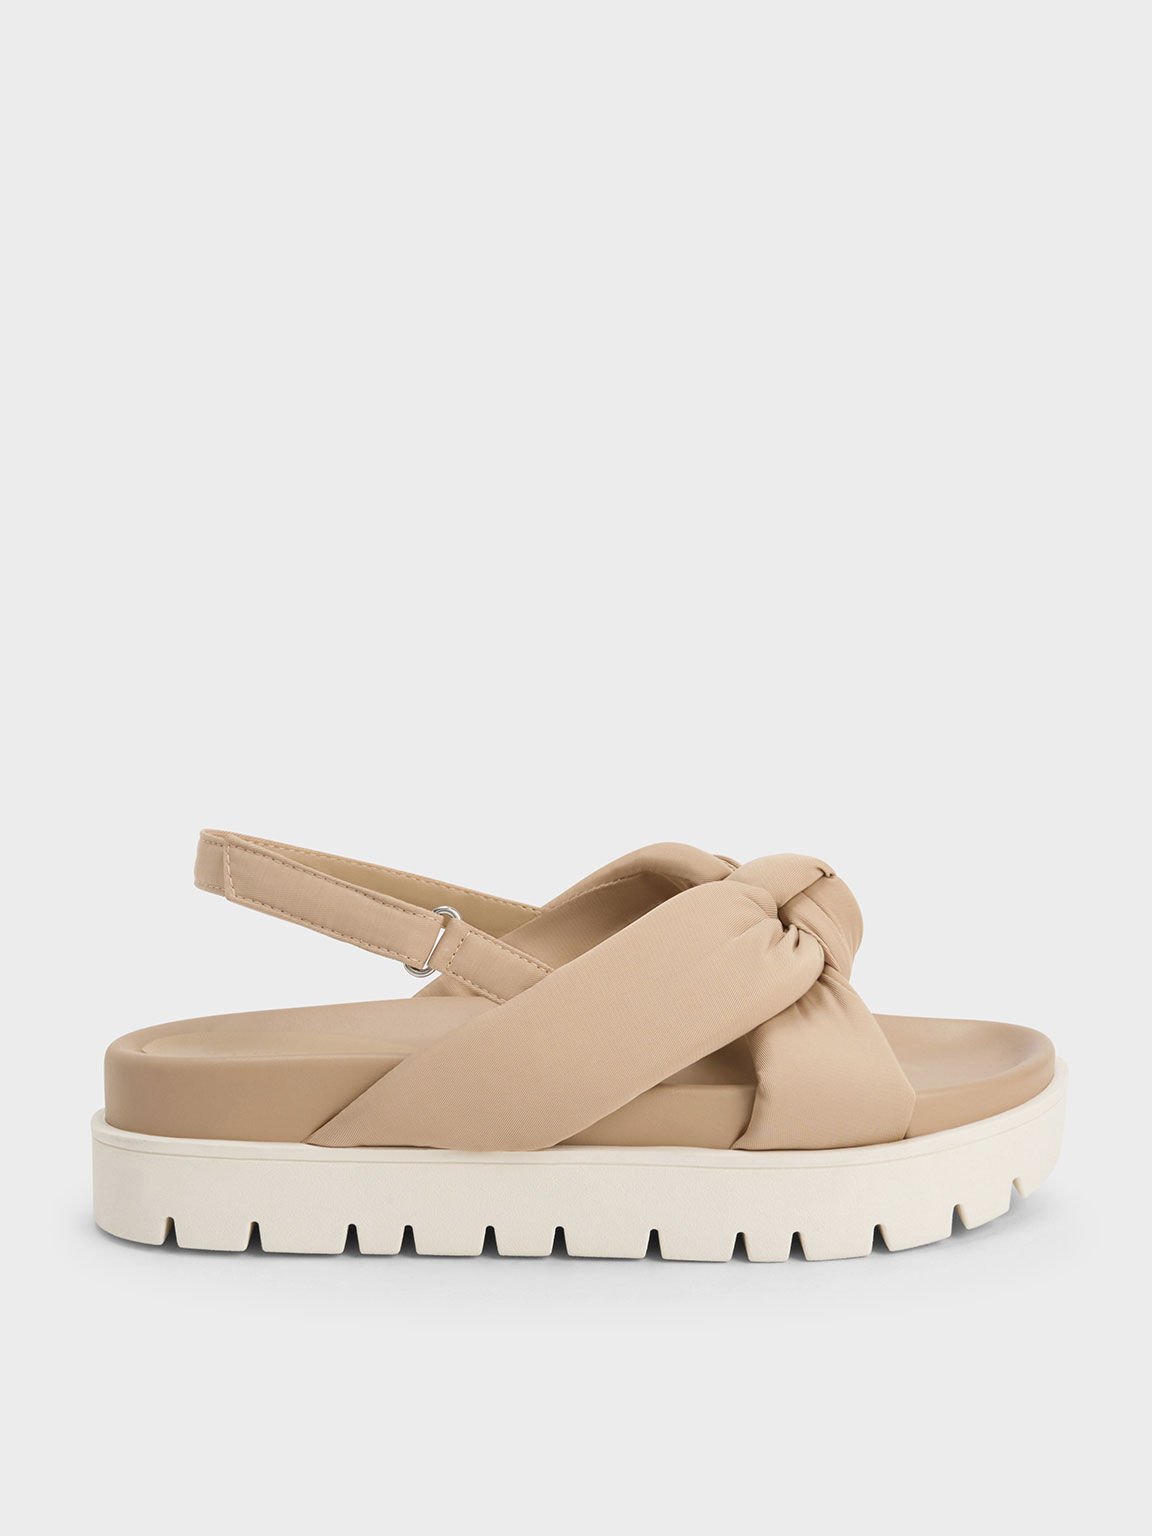 Nude Nylon Knotted Flatform Sandals - CHARLES & KEITH SG